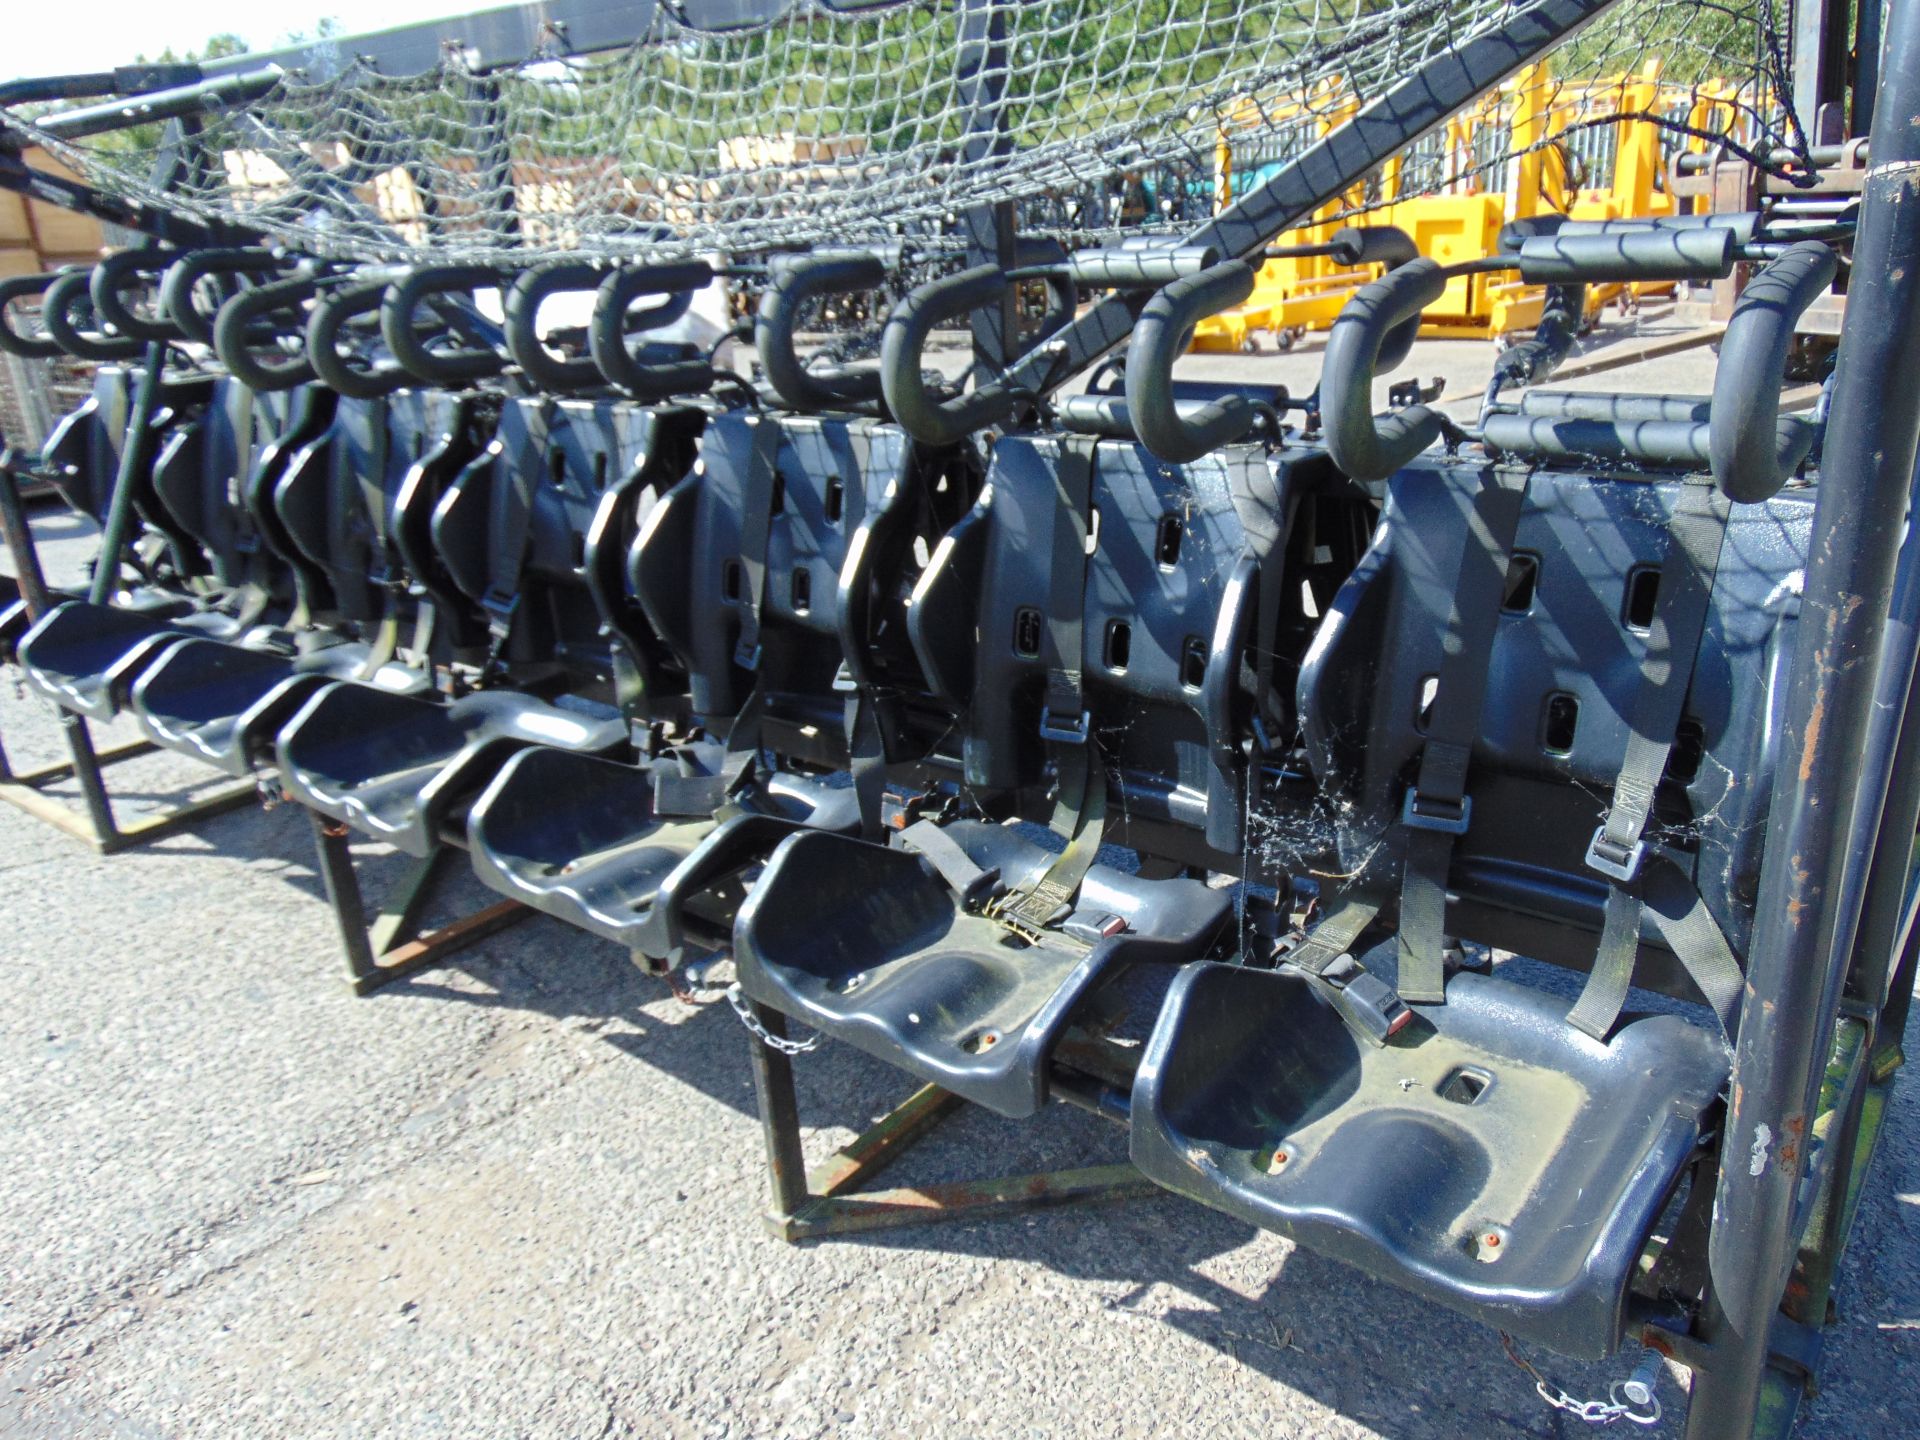 14 Man Security Seat suitable for Leyland Dafs, Bedfords etc - Image 7 of 8